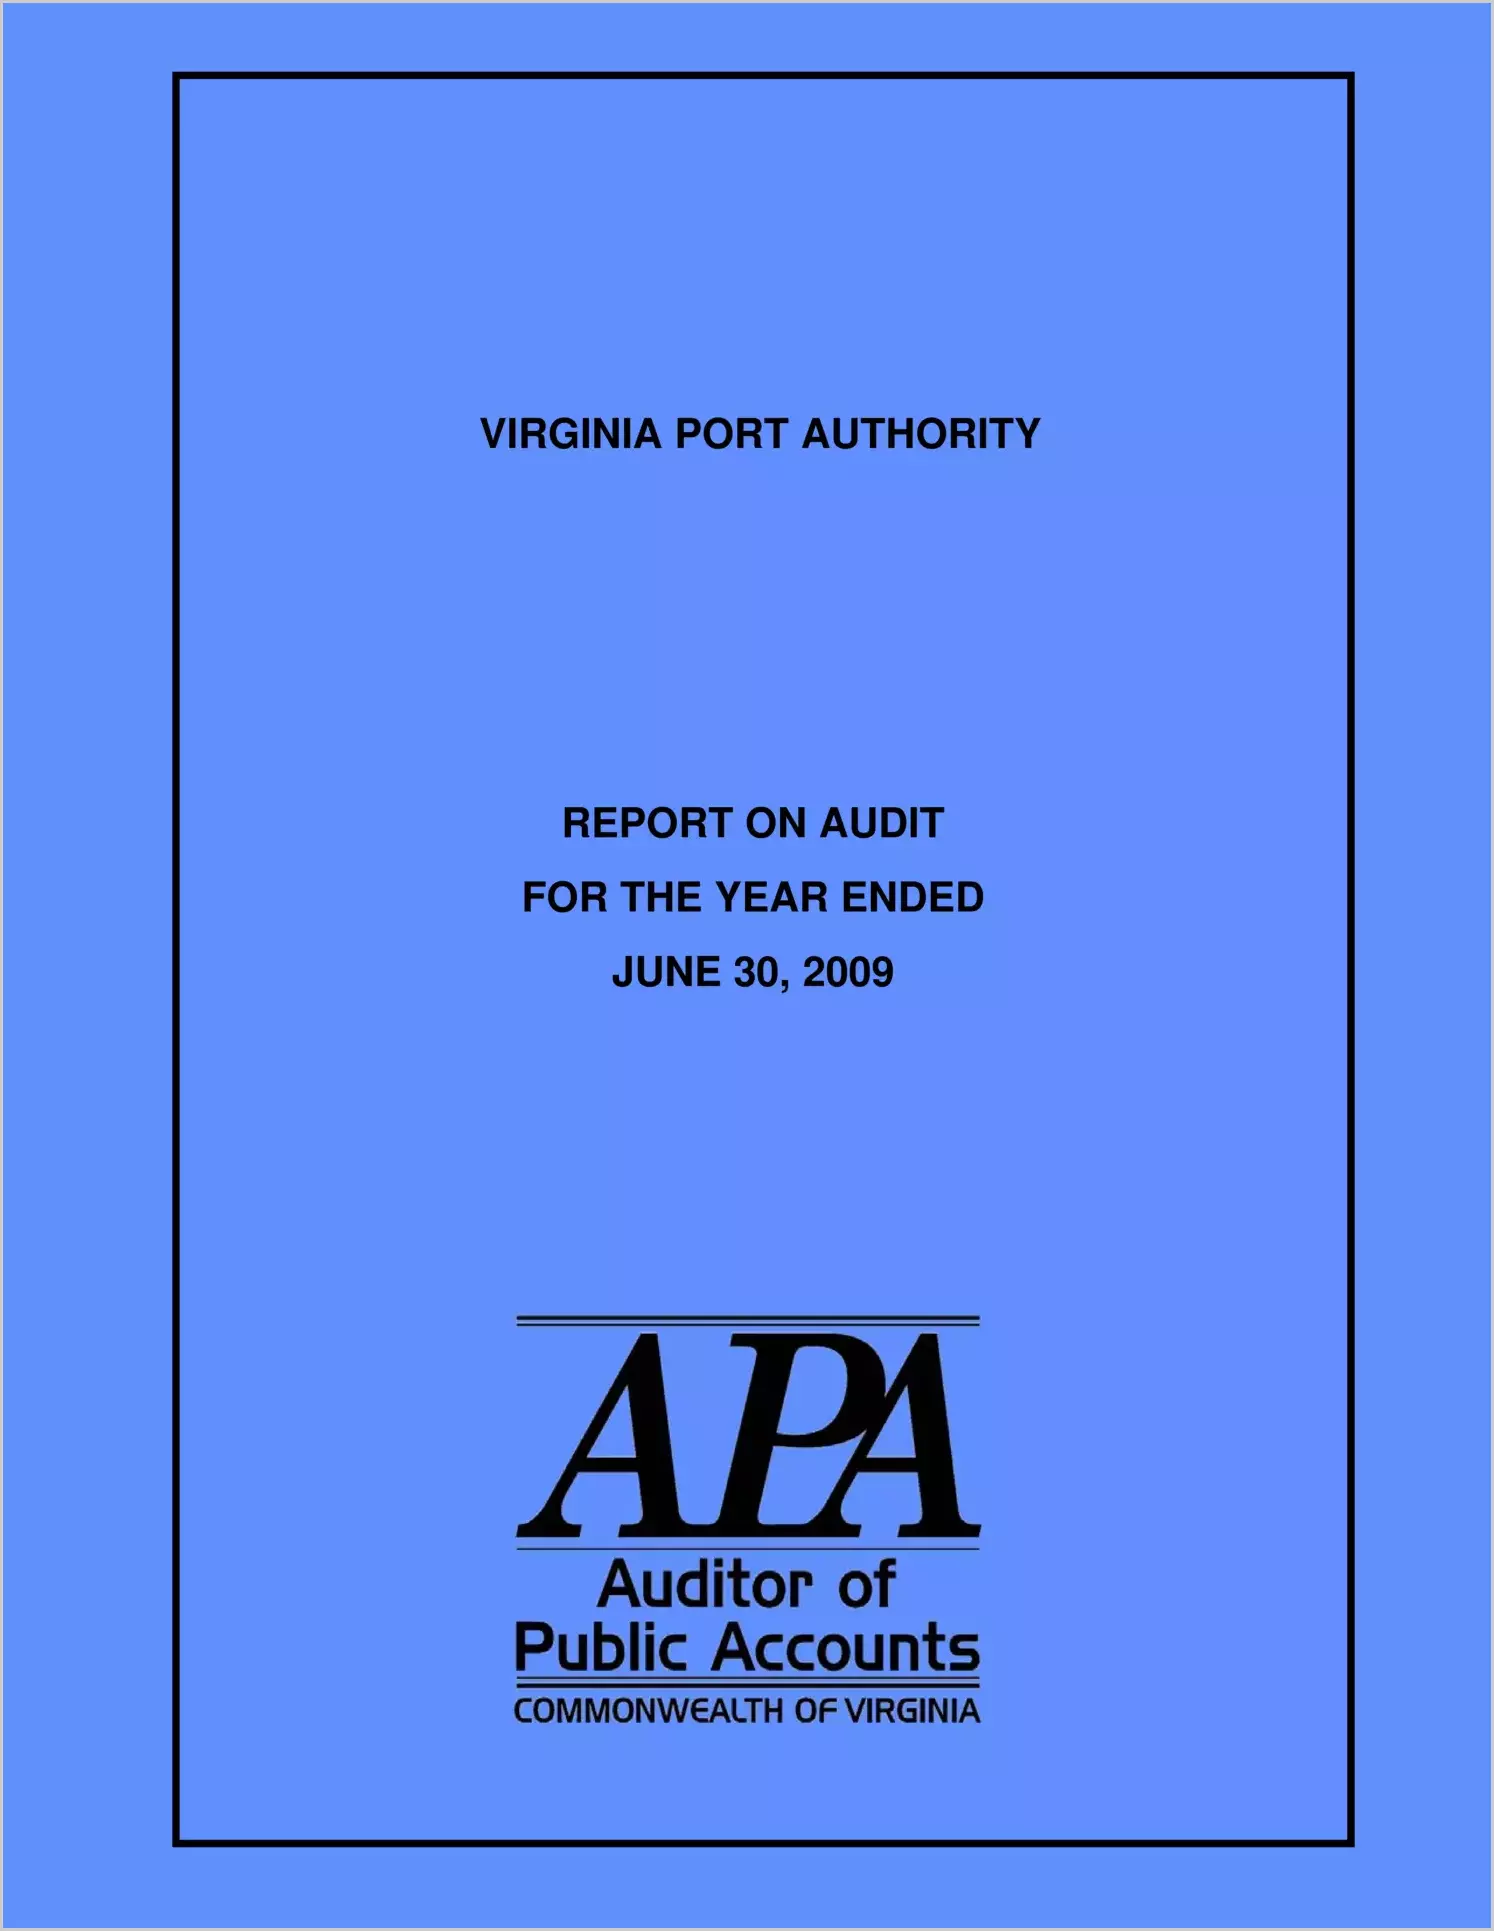 Virginia Port Authority for the year ended June 30, 2009